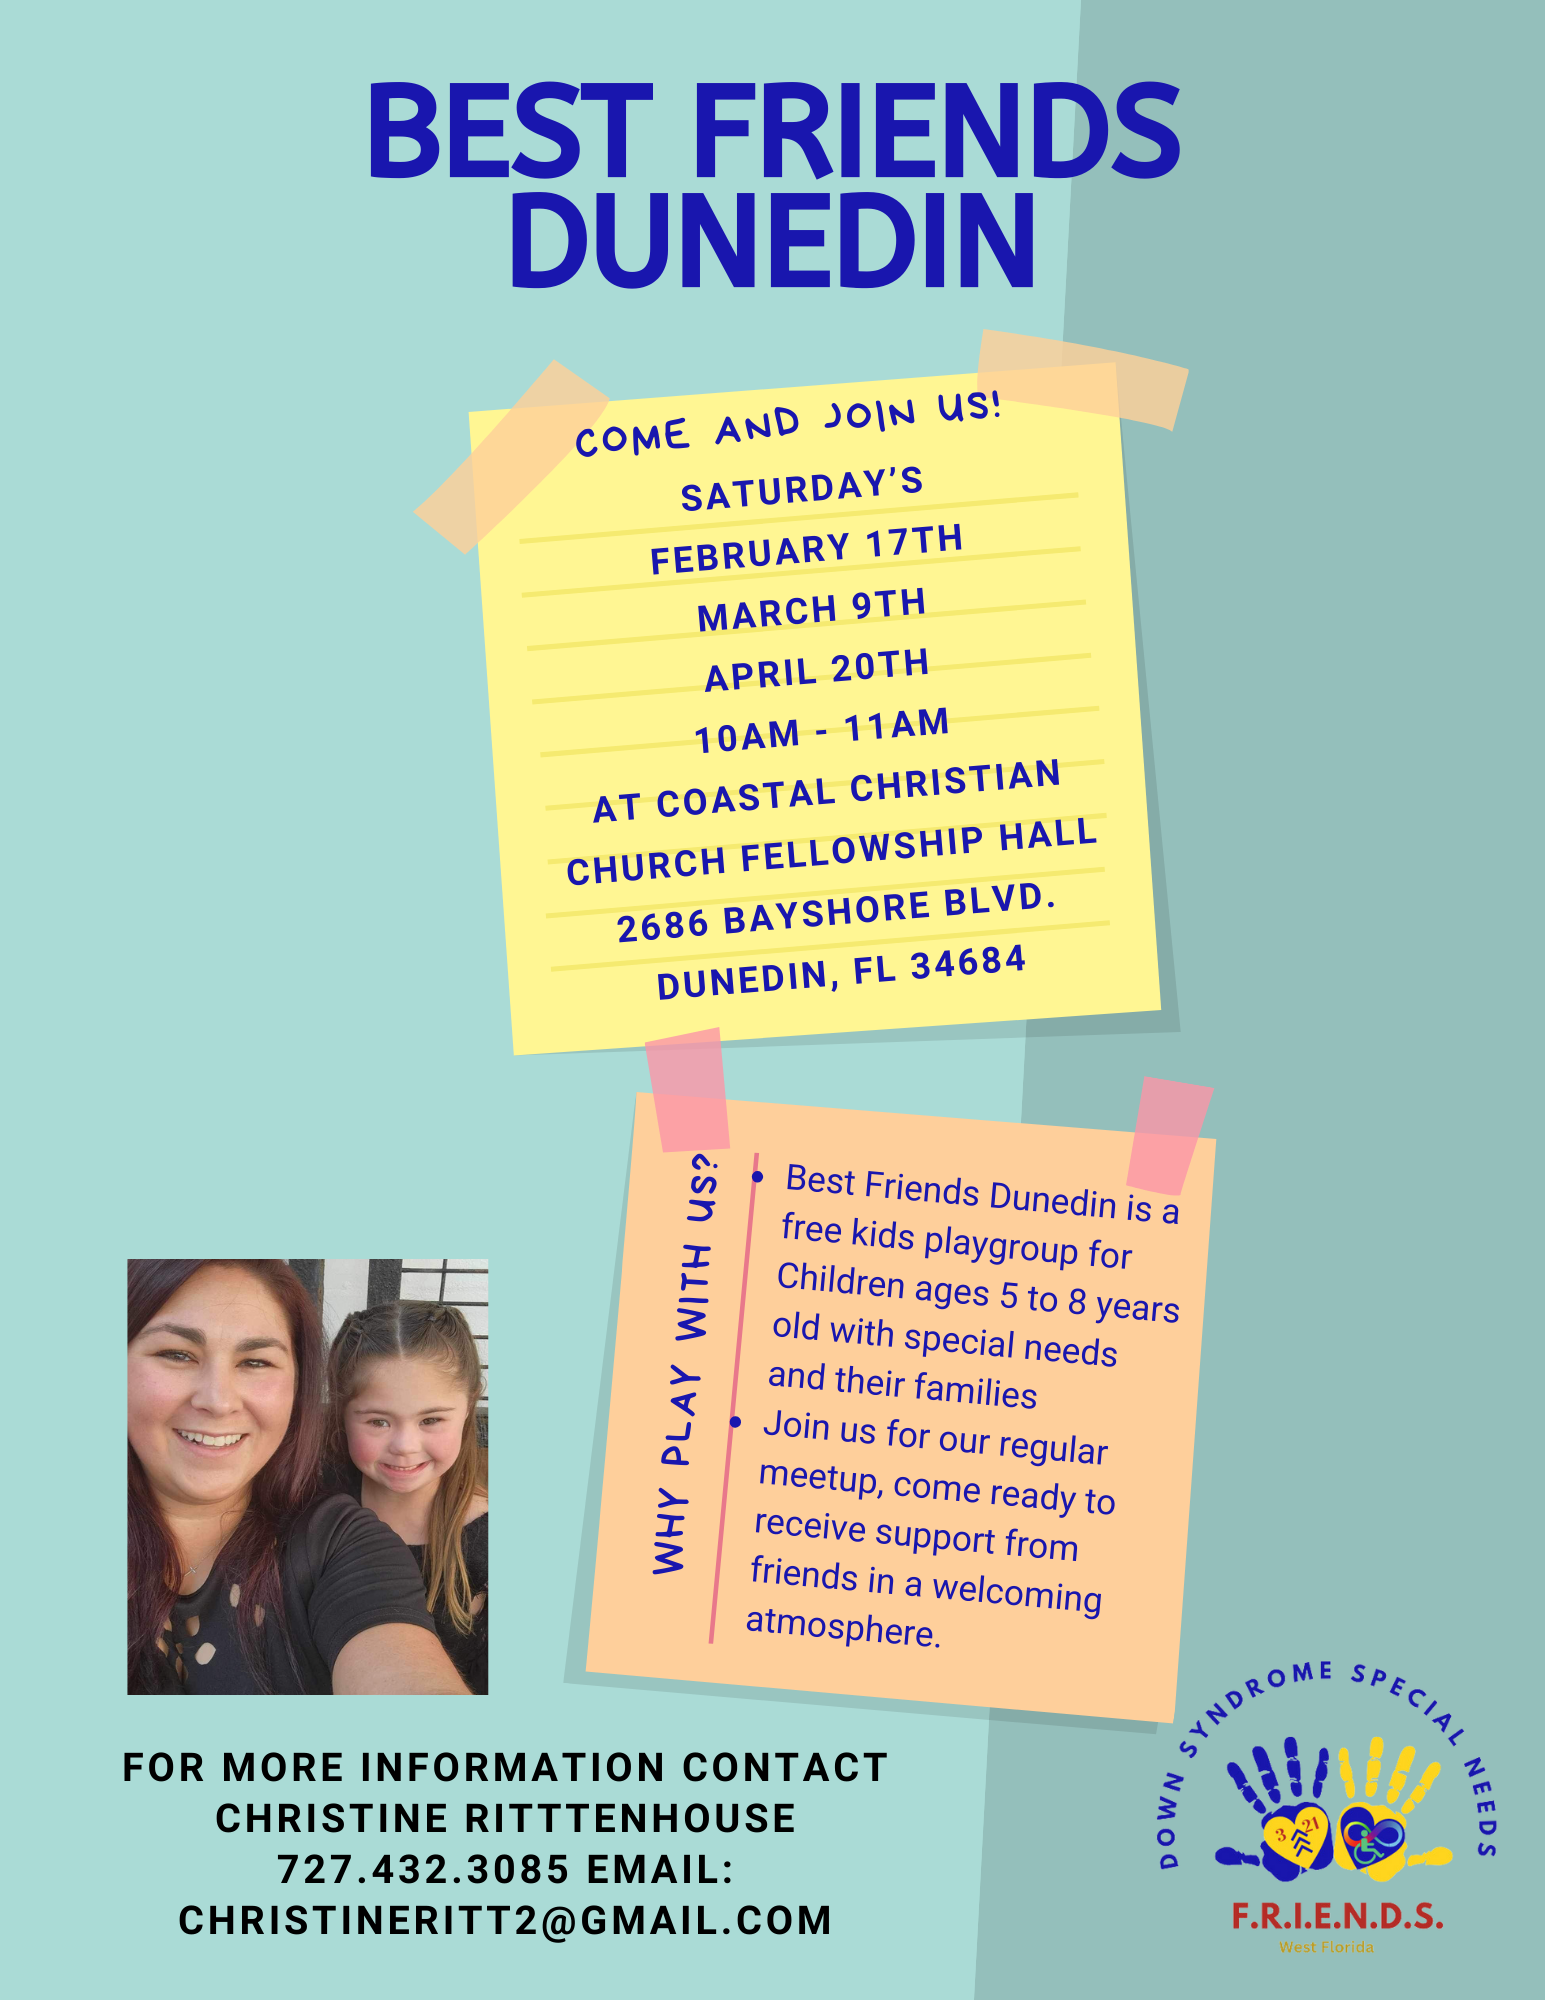 This is a graphic for a free special needs playgroup called Dunedin Best Friends.